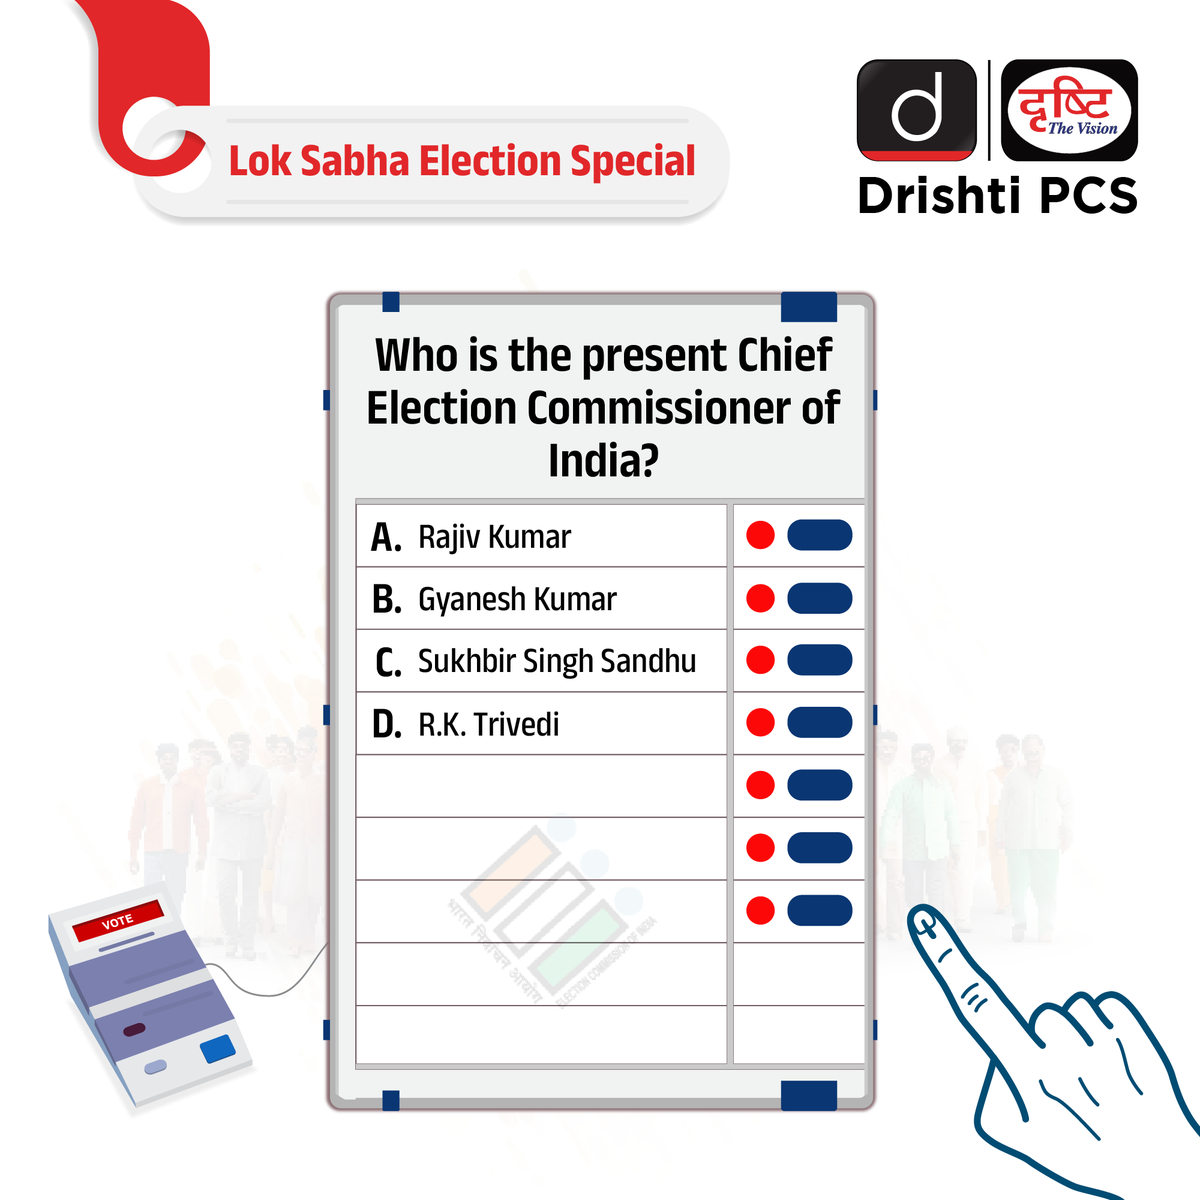 Share your answer to the above question about the Chief Election Commissioner of India in the comment section. #ChiefElectionCommissioner #ElectionCommission #India #LokSabha #Election #LokSabhaElection2024 #Voting #DrishtiIAS #DrishtiIASEnglish